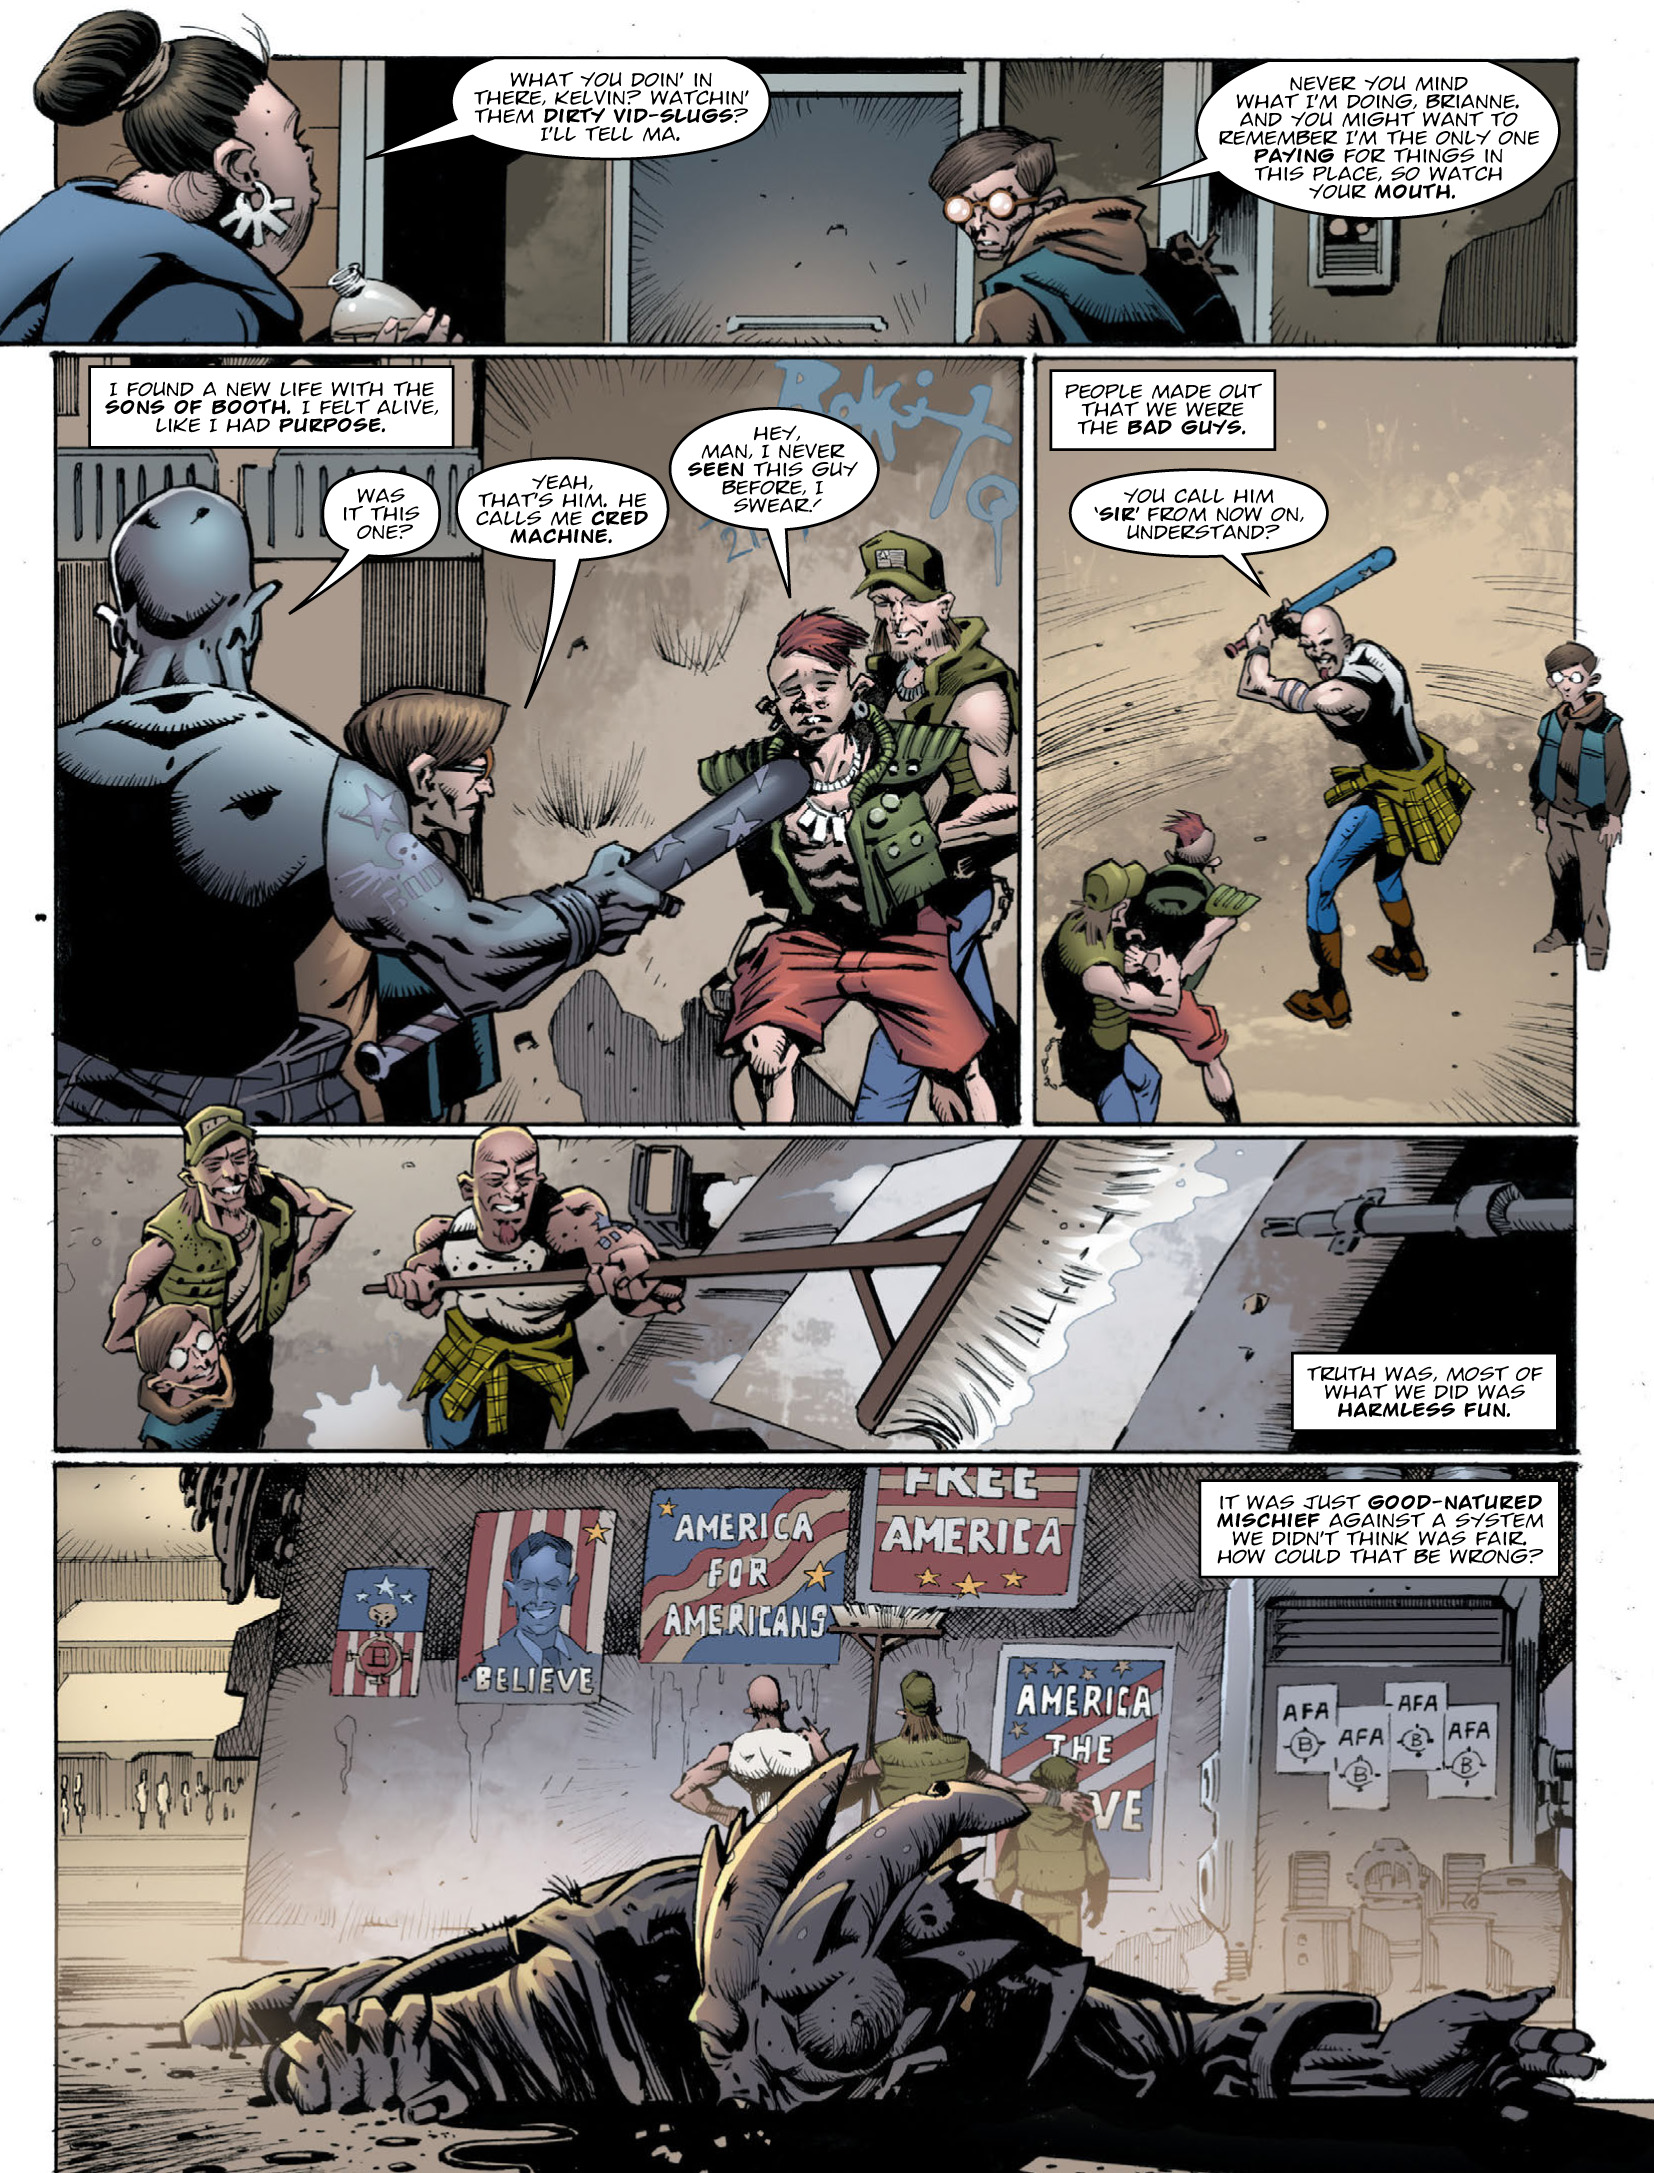 2000 AD: Chapter 2031 - Page 4